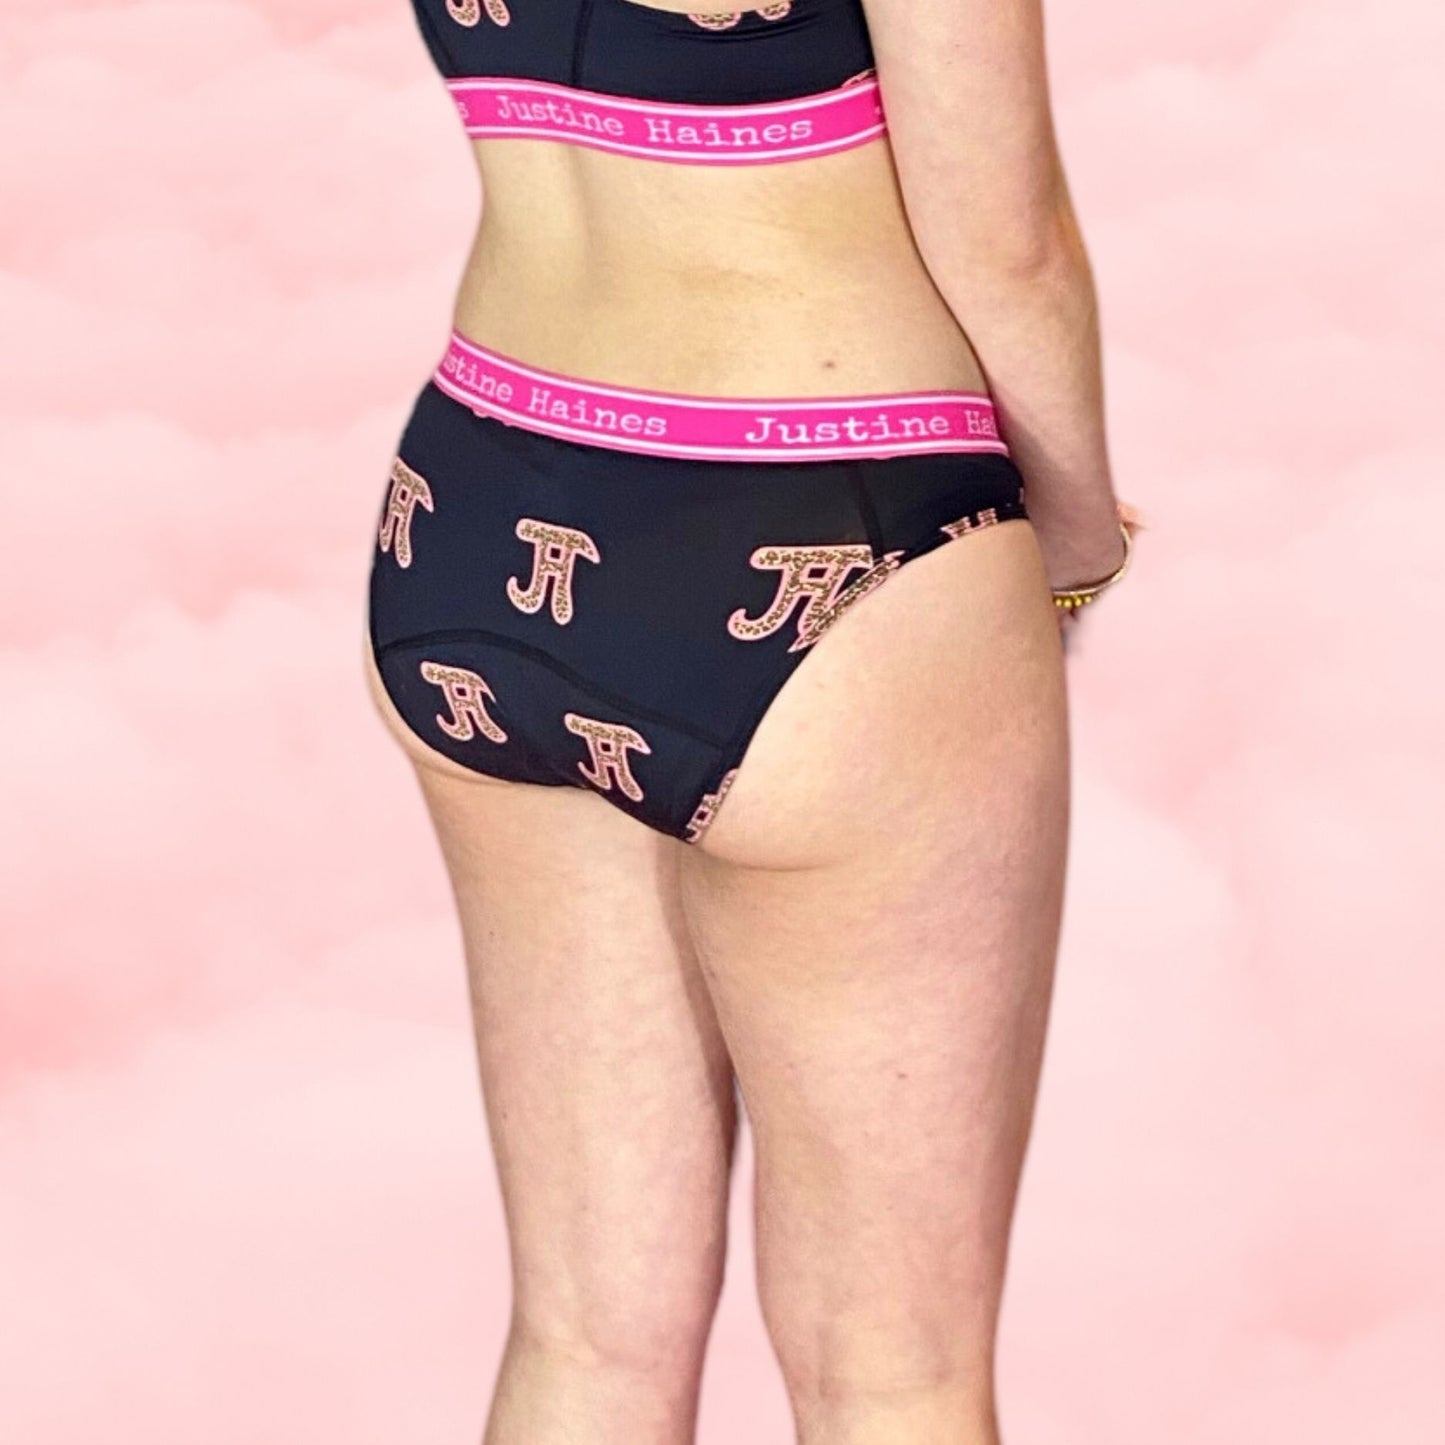 https://www.justinehaines.com/products/adorable-low-rise-fashion-print-period-panties-in-jh-logo-with-leopard?pr_prod_strat=copurchase_transfer_learning&pr_rec_id=6201e378d&pr_rec_pid=7983783870681&pr_ref_pid=7983810347225&pr_seq=uniform